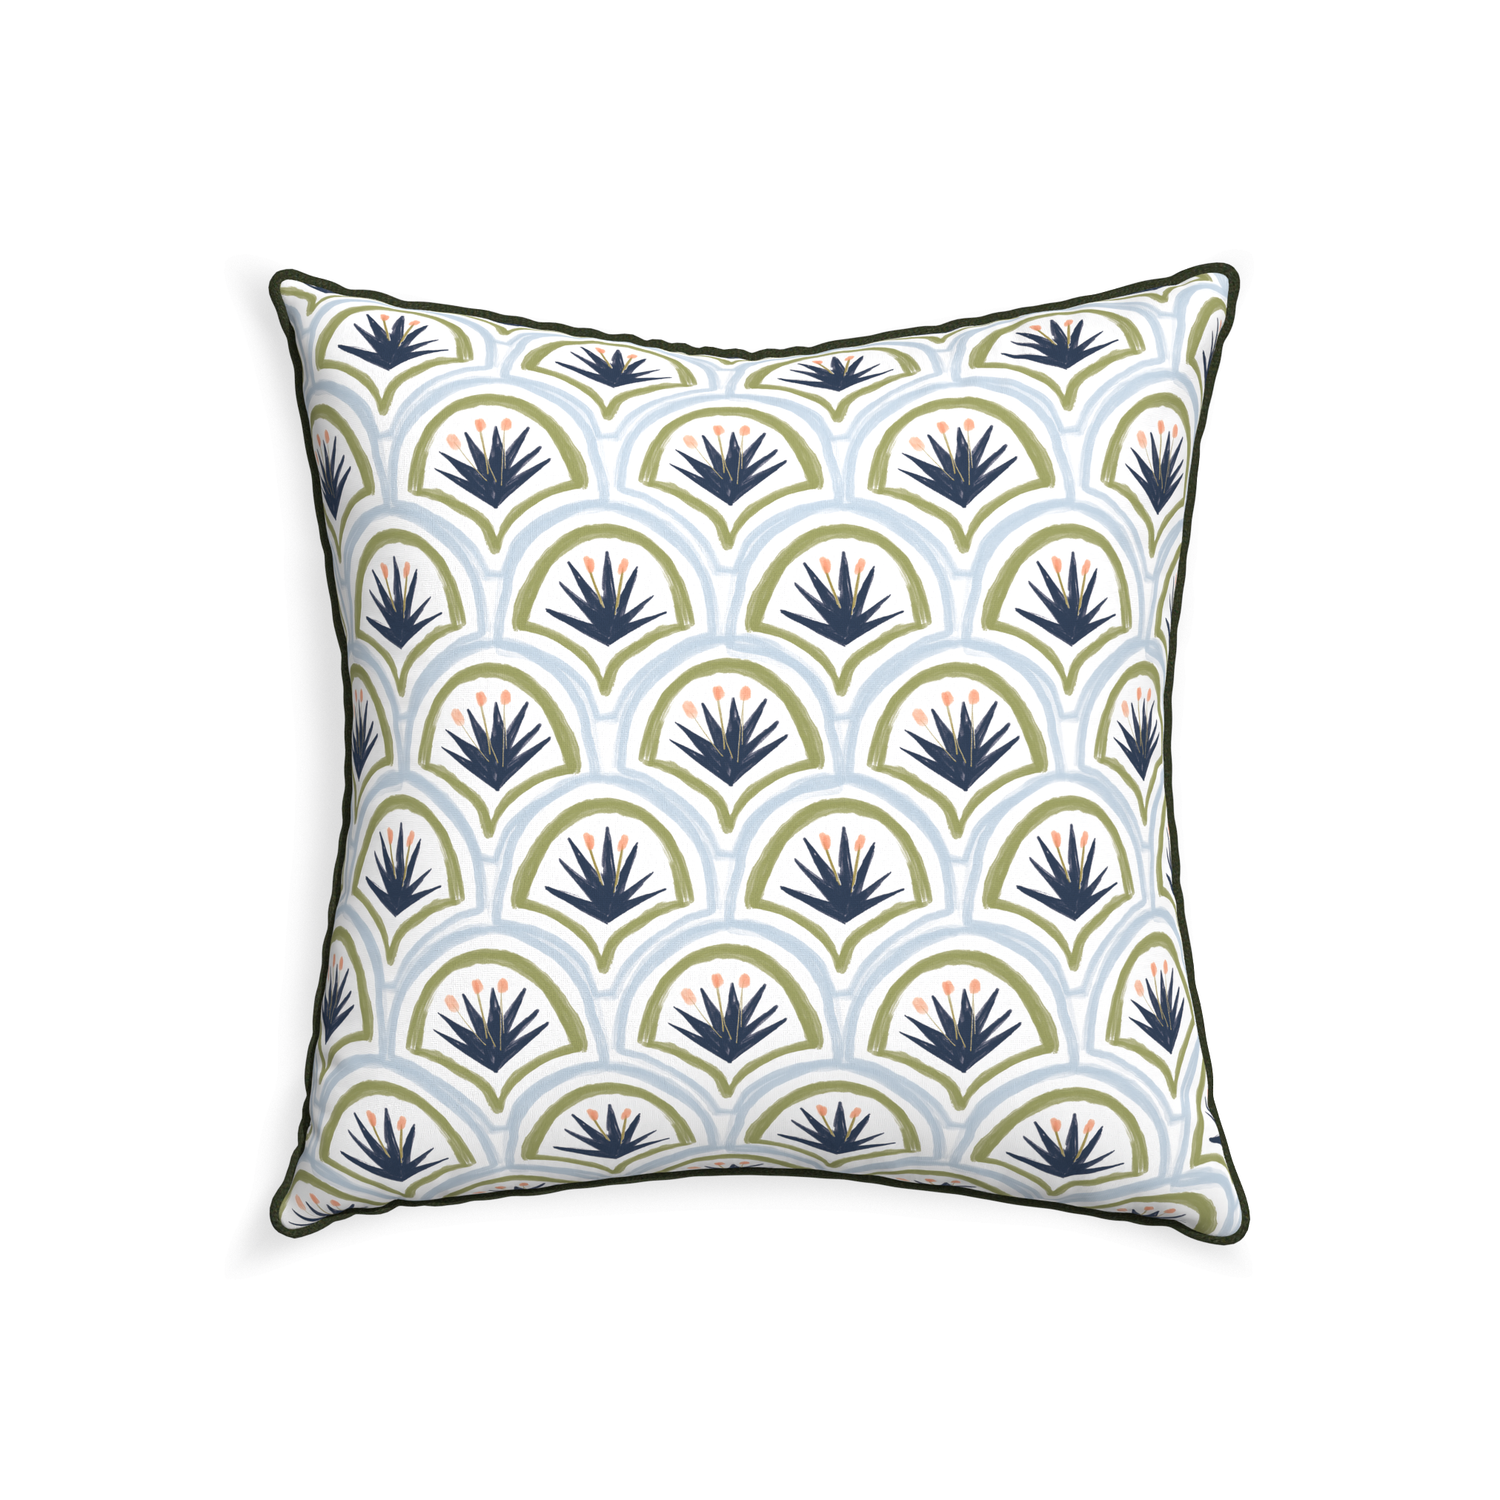 22-square thatcher midnight custom art deco palm patternpillow with f piping on white background